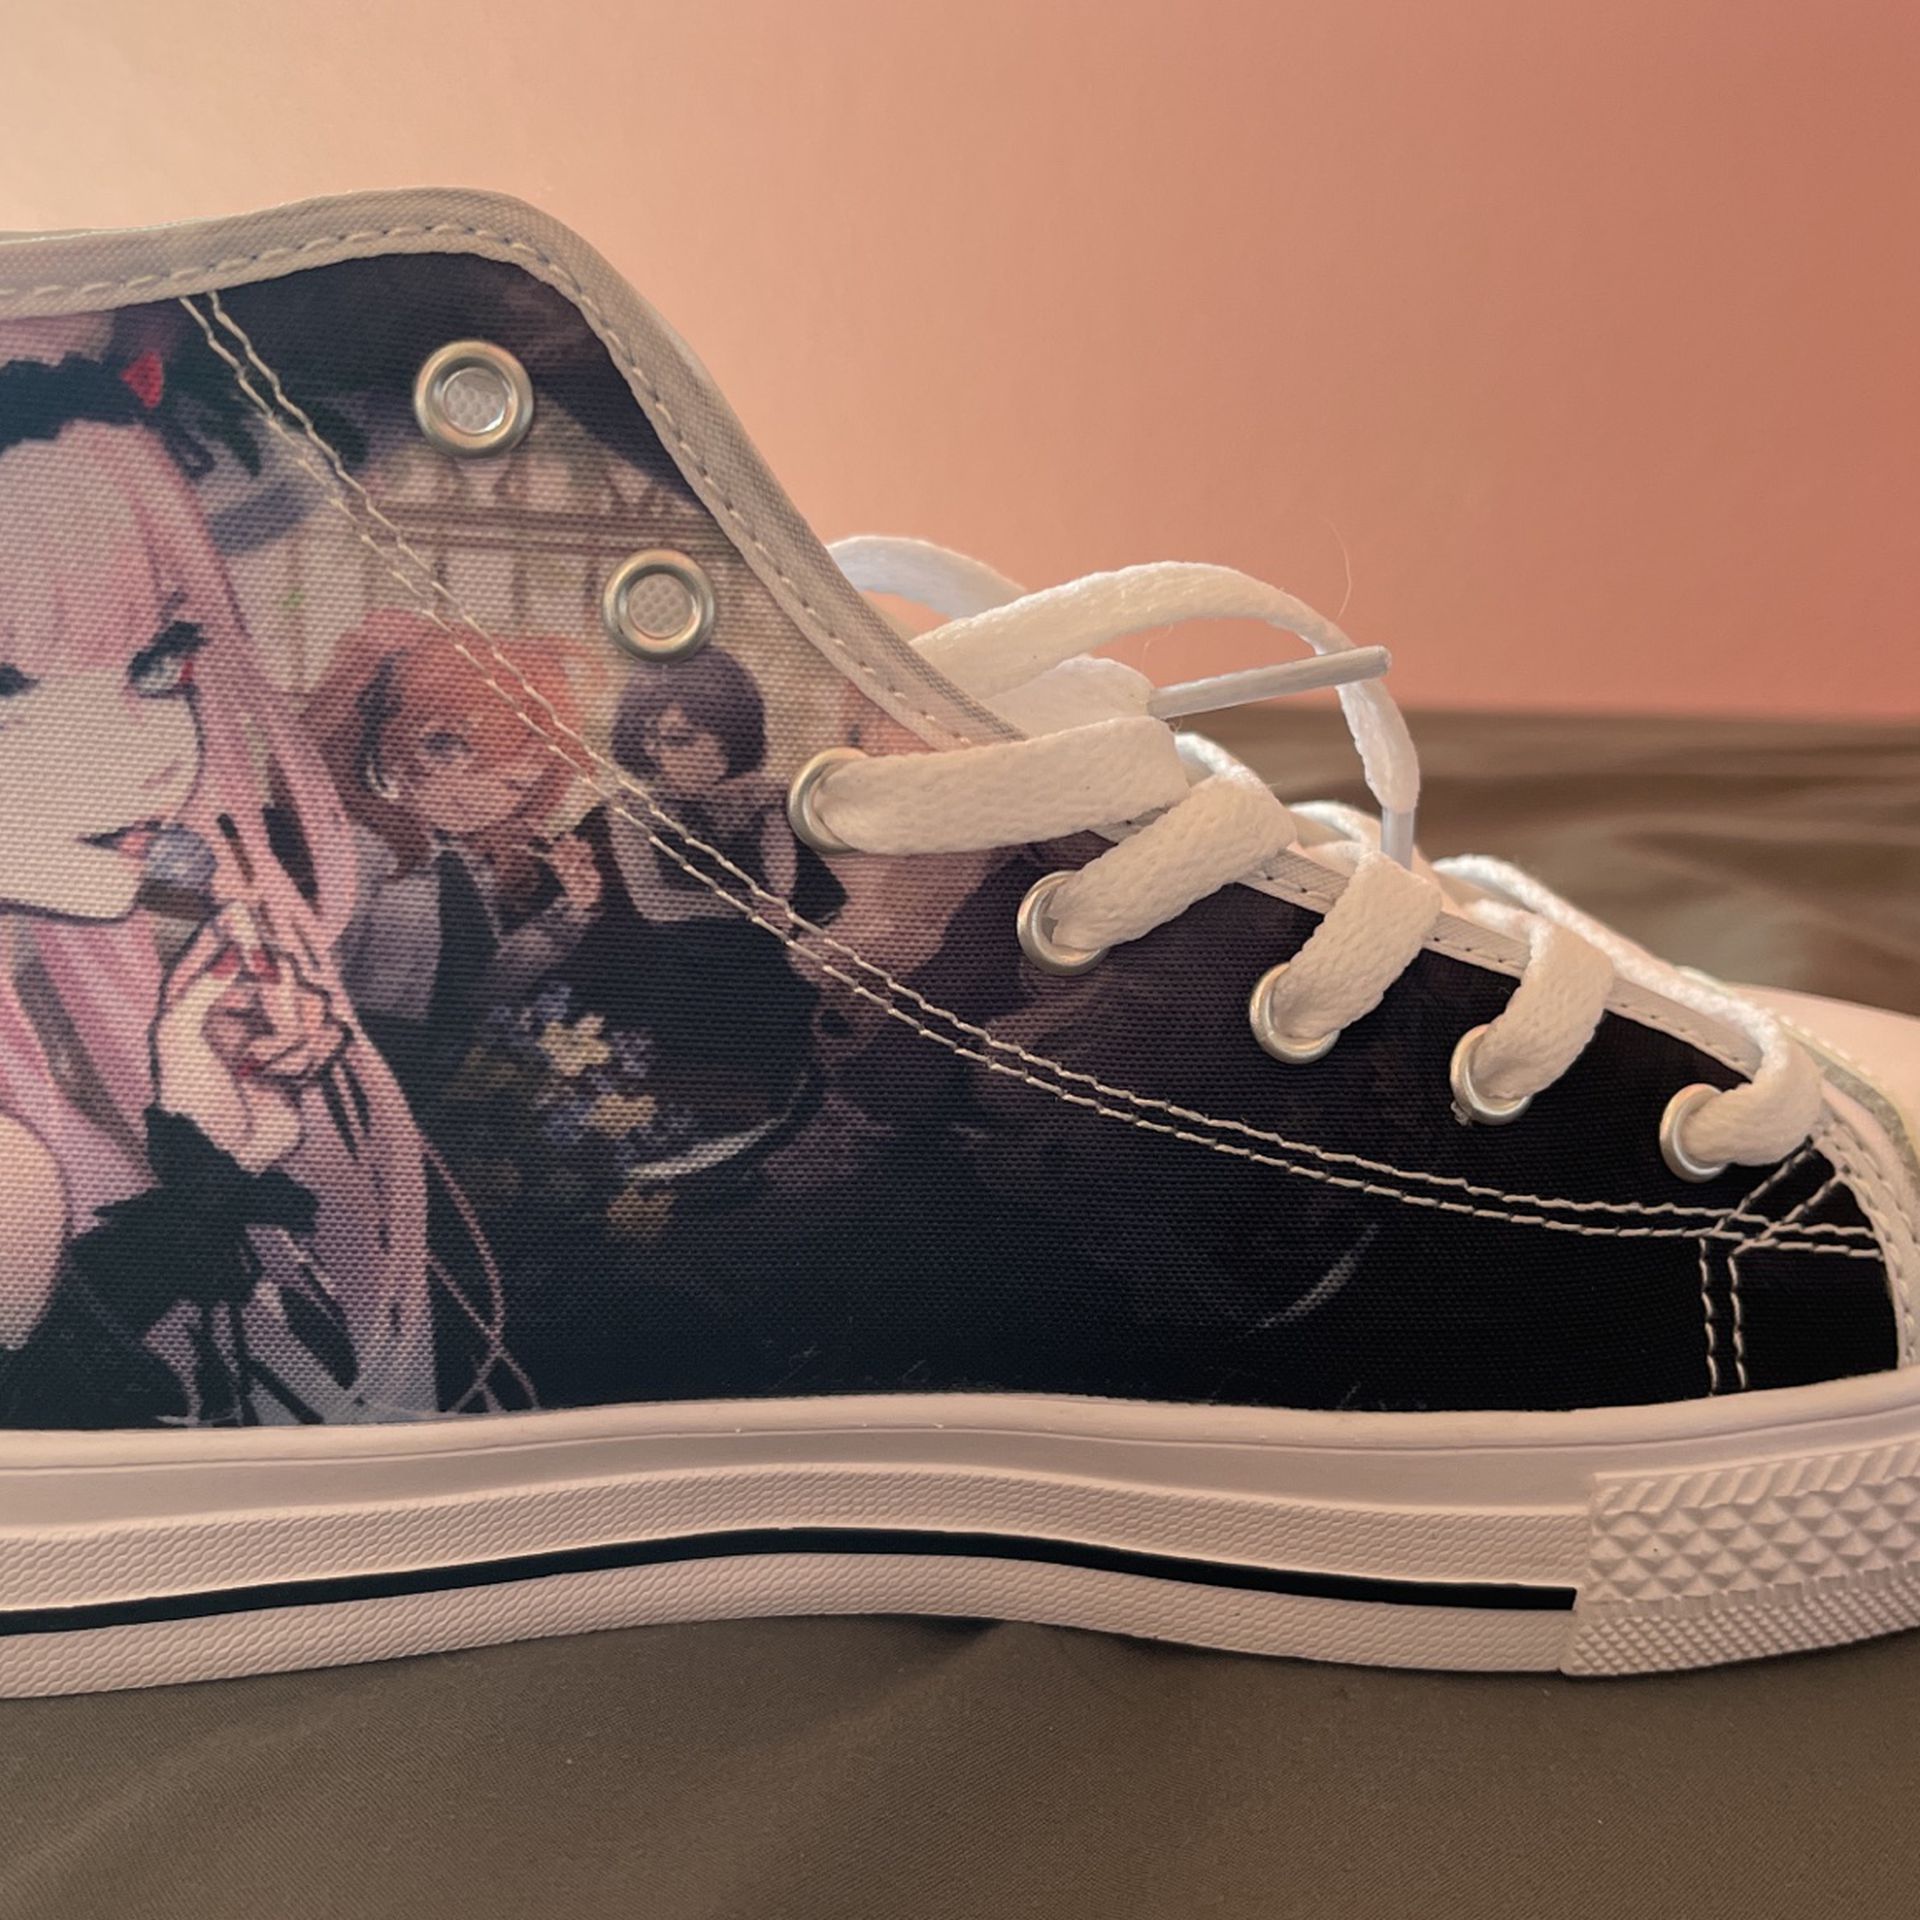 ZeroTwo Converse Shoes